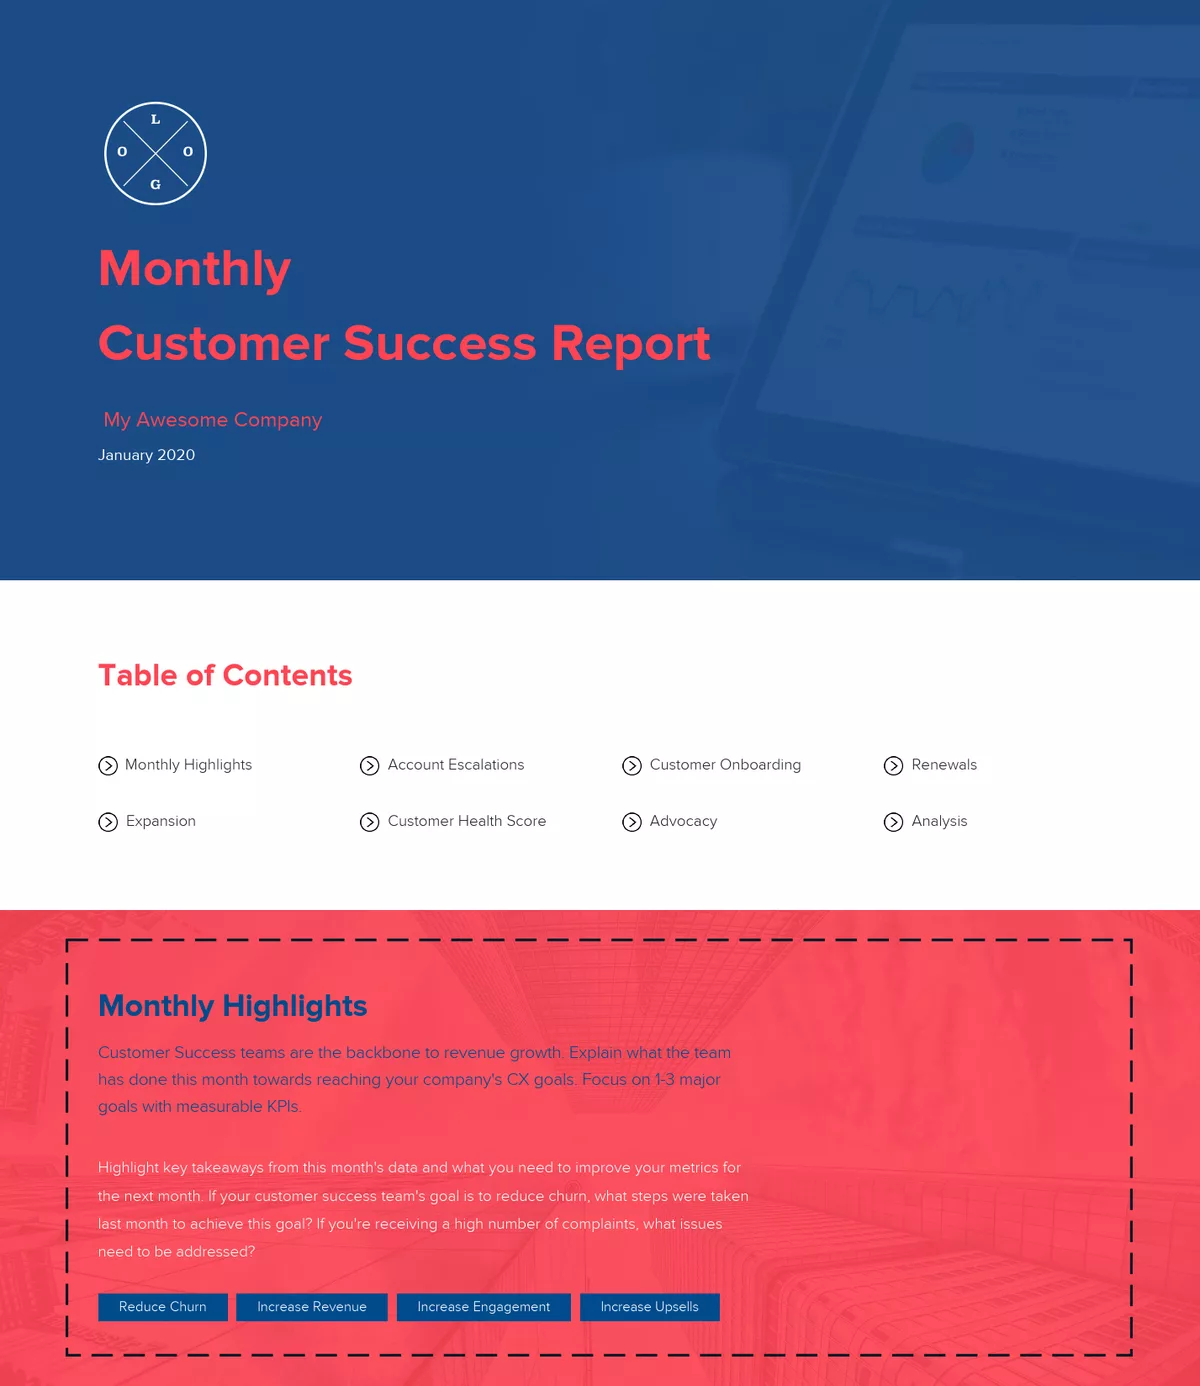 Customer Success Efforts And Achievements